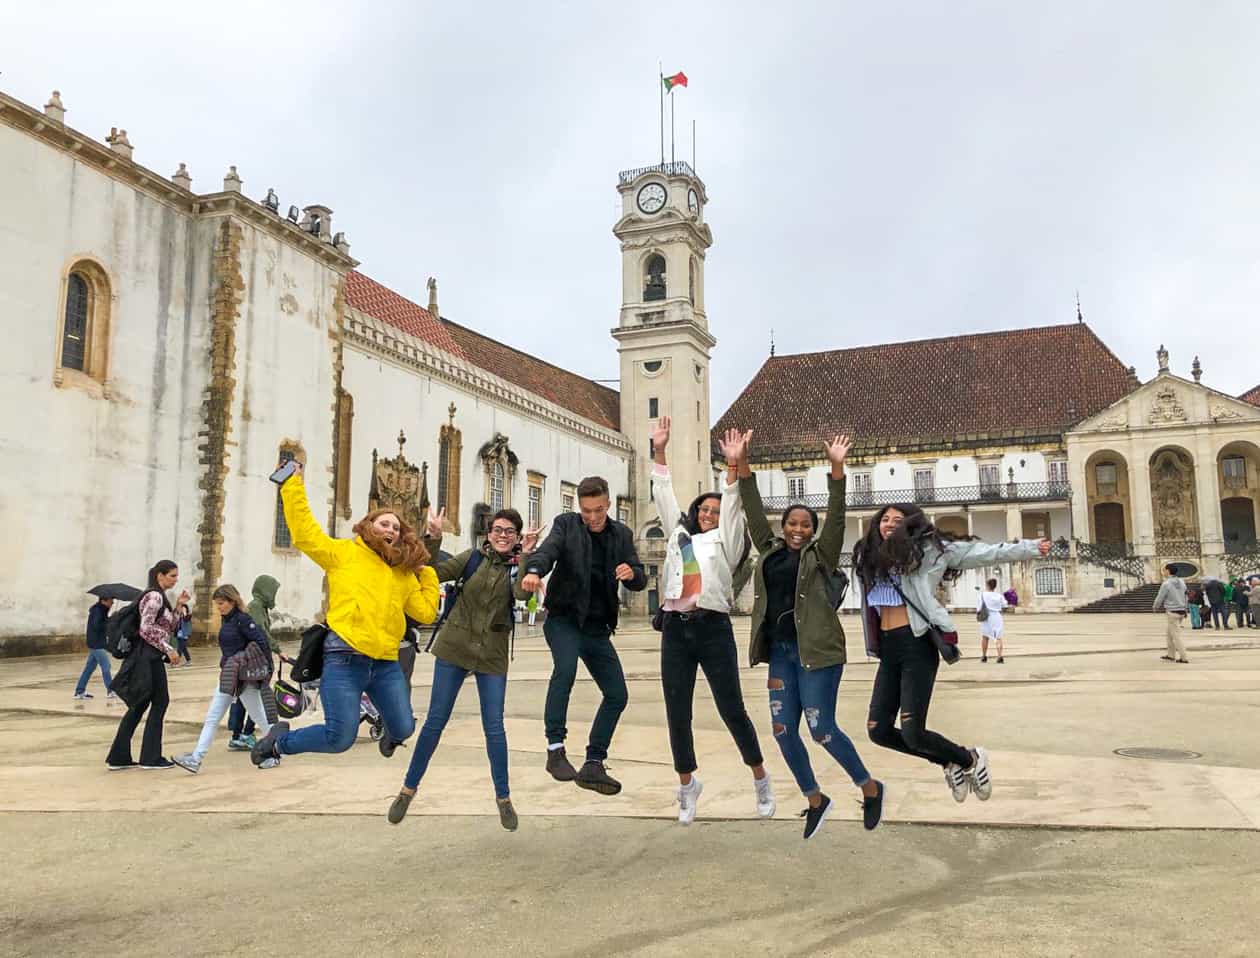 Students jumping in front of a building with a tower.